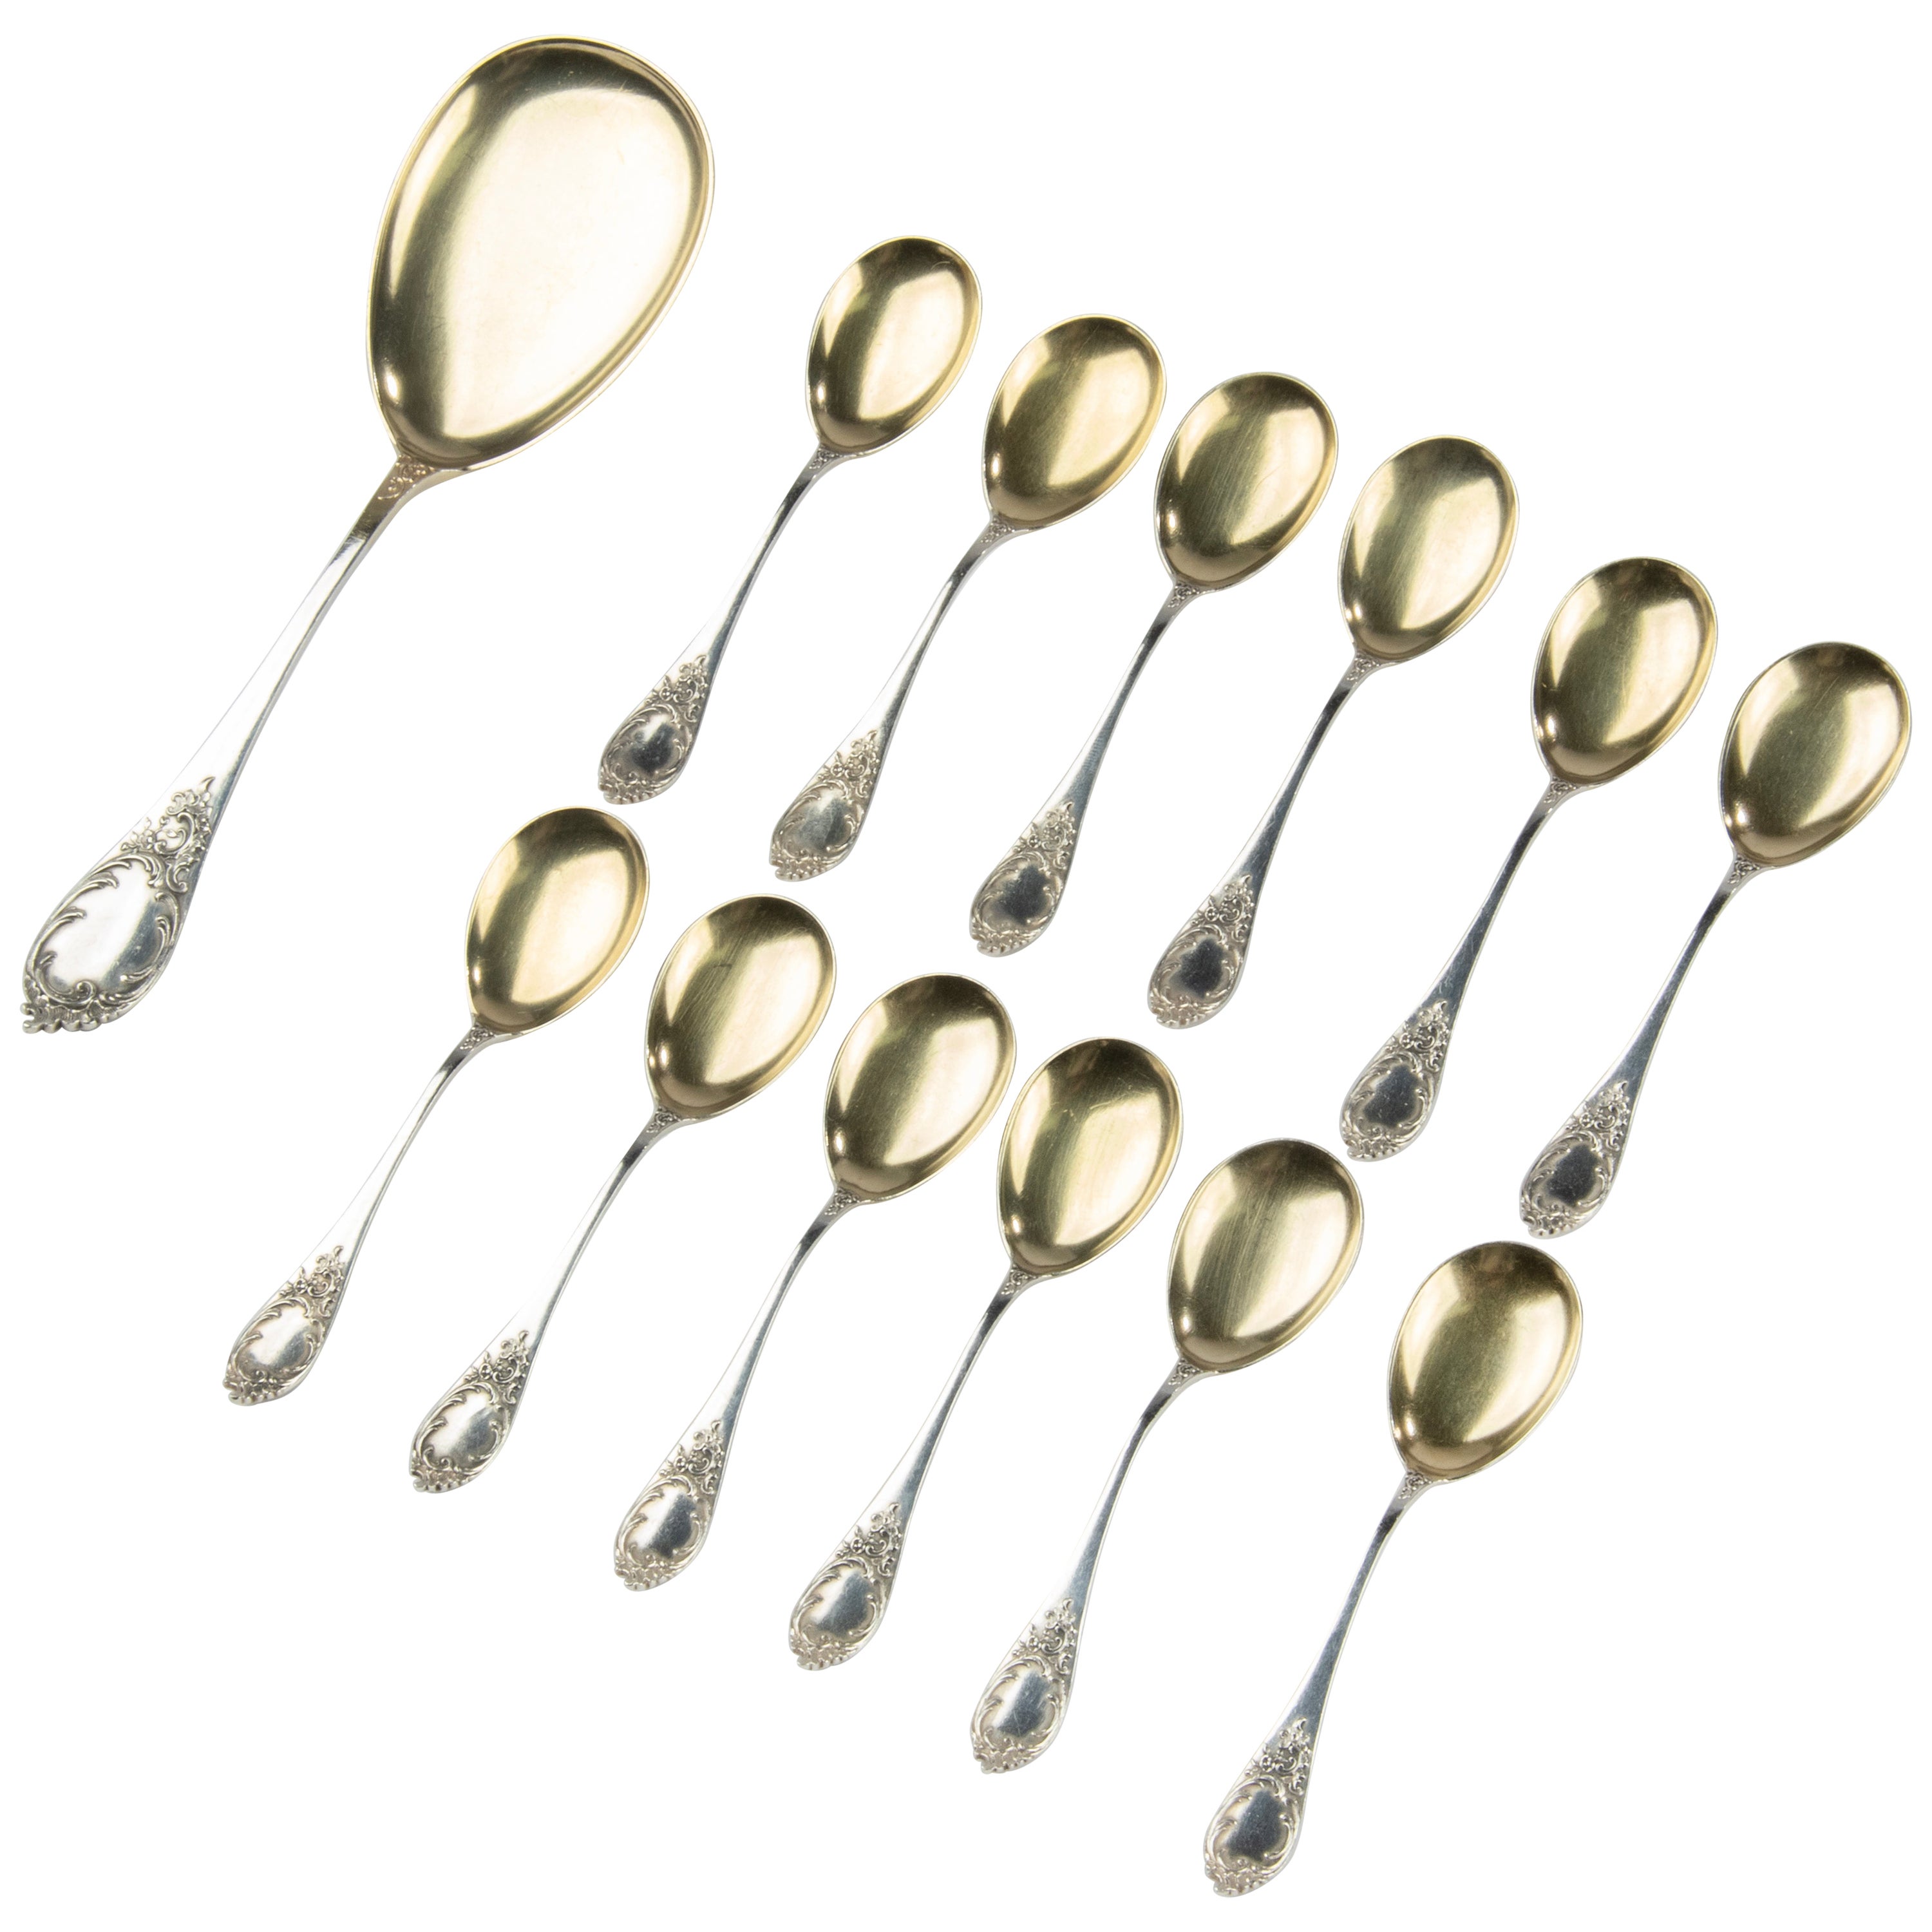 13-Piece Set of Solid Silver Ice Cream Spoons, Late 19th Century